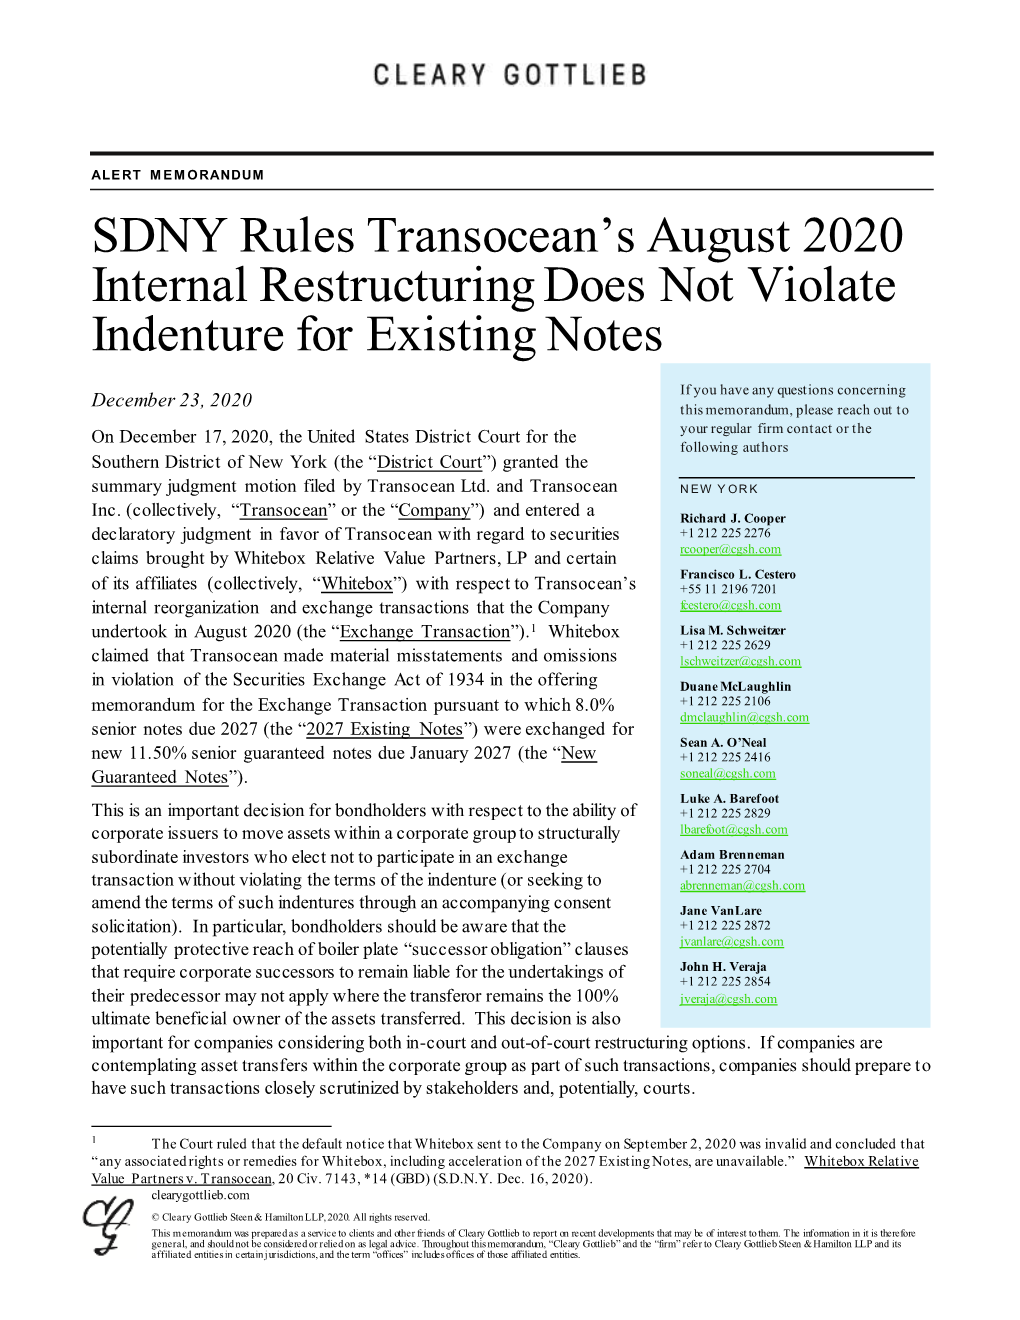 SDNY Rules Transocean's August 2020 Internal Restructuring Does